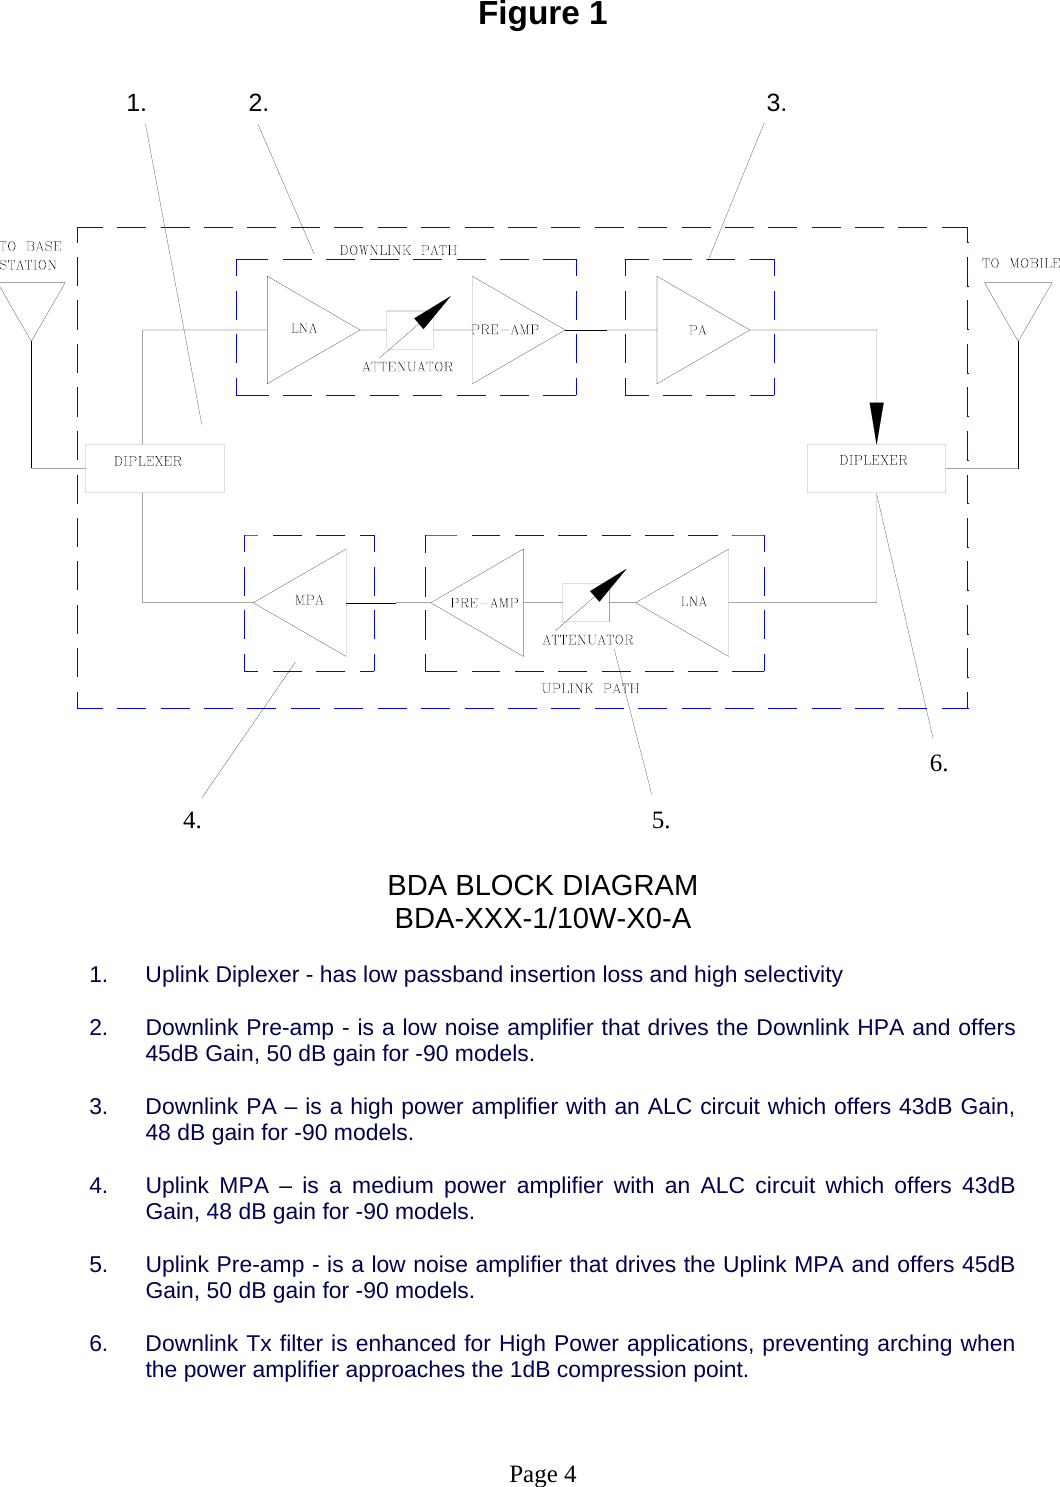 Figure 1            1.      2.                 3.                                   6.                              4.                     5.  BDA BLOCK DIAGRAM BDA-XXX-1/10W-X0-A  1.  Uplink Diplexer - has low passband insertion loss and high selectivity   2.  Downlink Pre-amp - is a low noise amplifier that drives the Downlink HPA and offers 45dB Gain, 50 dB gain for -90 models.  3.  Downlink PA – is a high power amplifier with an ALC circuit which offers 43dB Gain, 48 dB gain for -90 models.  4.  Uplink MPA – is a medium power amplifier with an ALC circuit which offers 43dB Gain, 48 dB gain for -90 models.  5.  Uplink Pre-amp - is a low noise amplifier that drives the Uplink MPA and offers 45dB Gain, 50 dB gain for -90 models.  6.  Downlink Tx filter is enhanced for High Power applications, preventing arching when the power amplifier approaches the 1dB compression point.   Page 4 